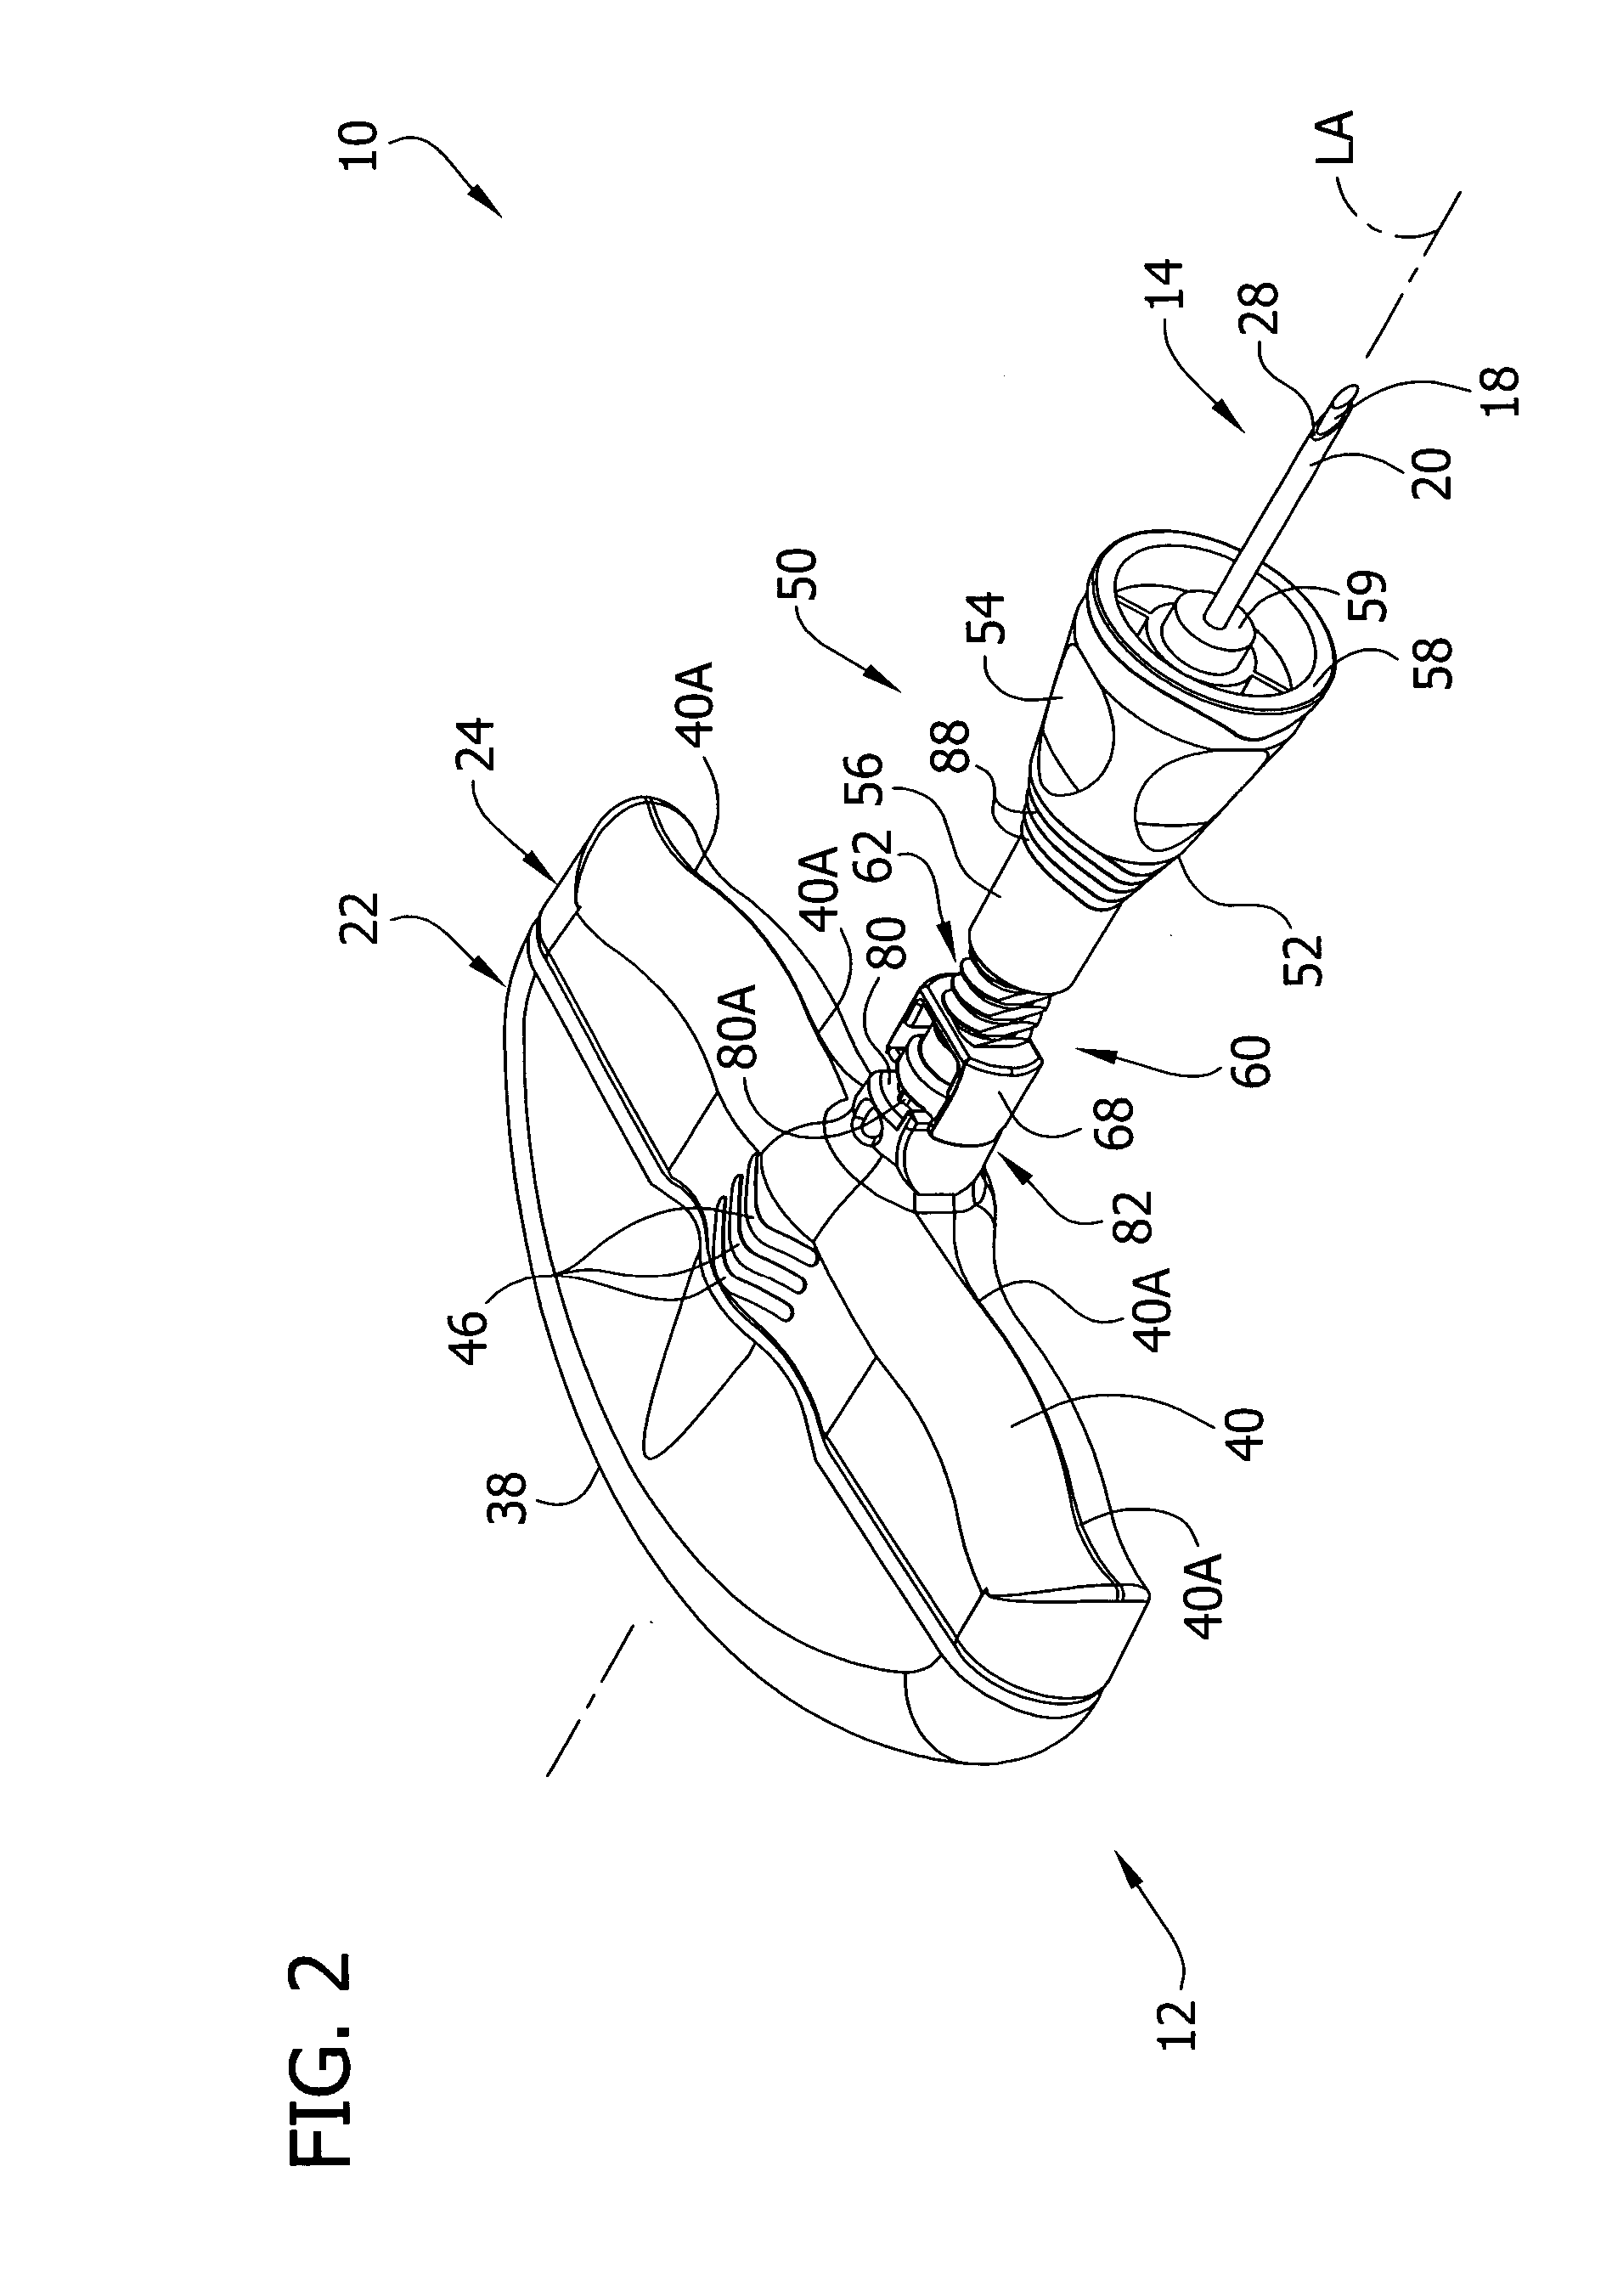 Needle assembly with removable depth stop